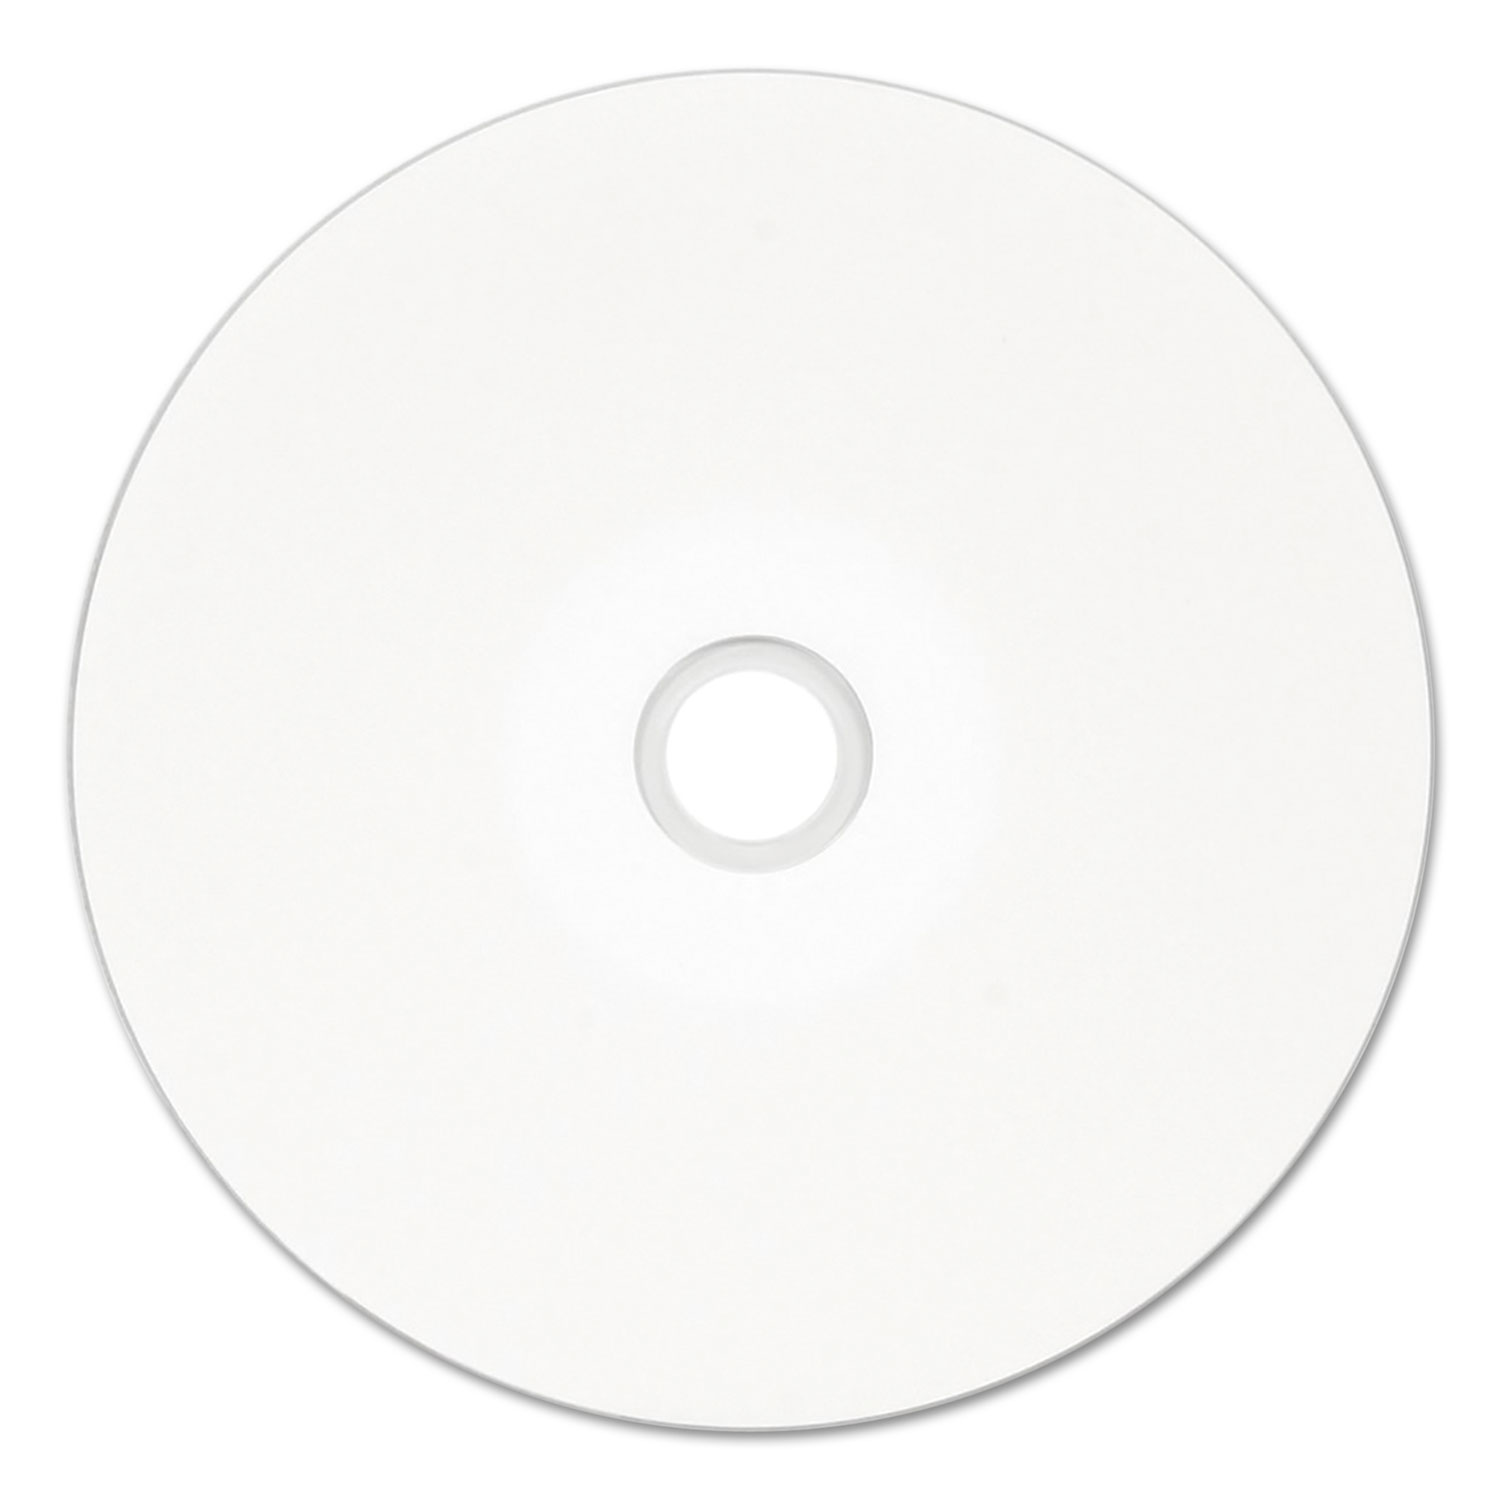 Inkjet Printable DVD+R Discs, 4.7GB, 16x, Spindle, White, 50/Pack